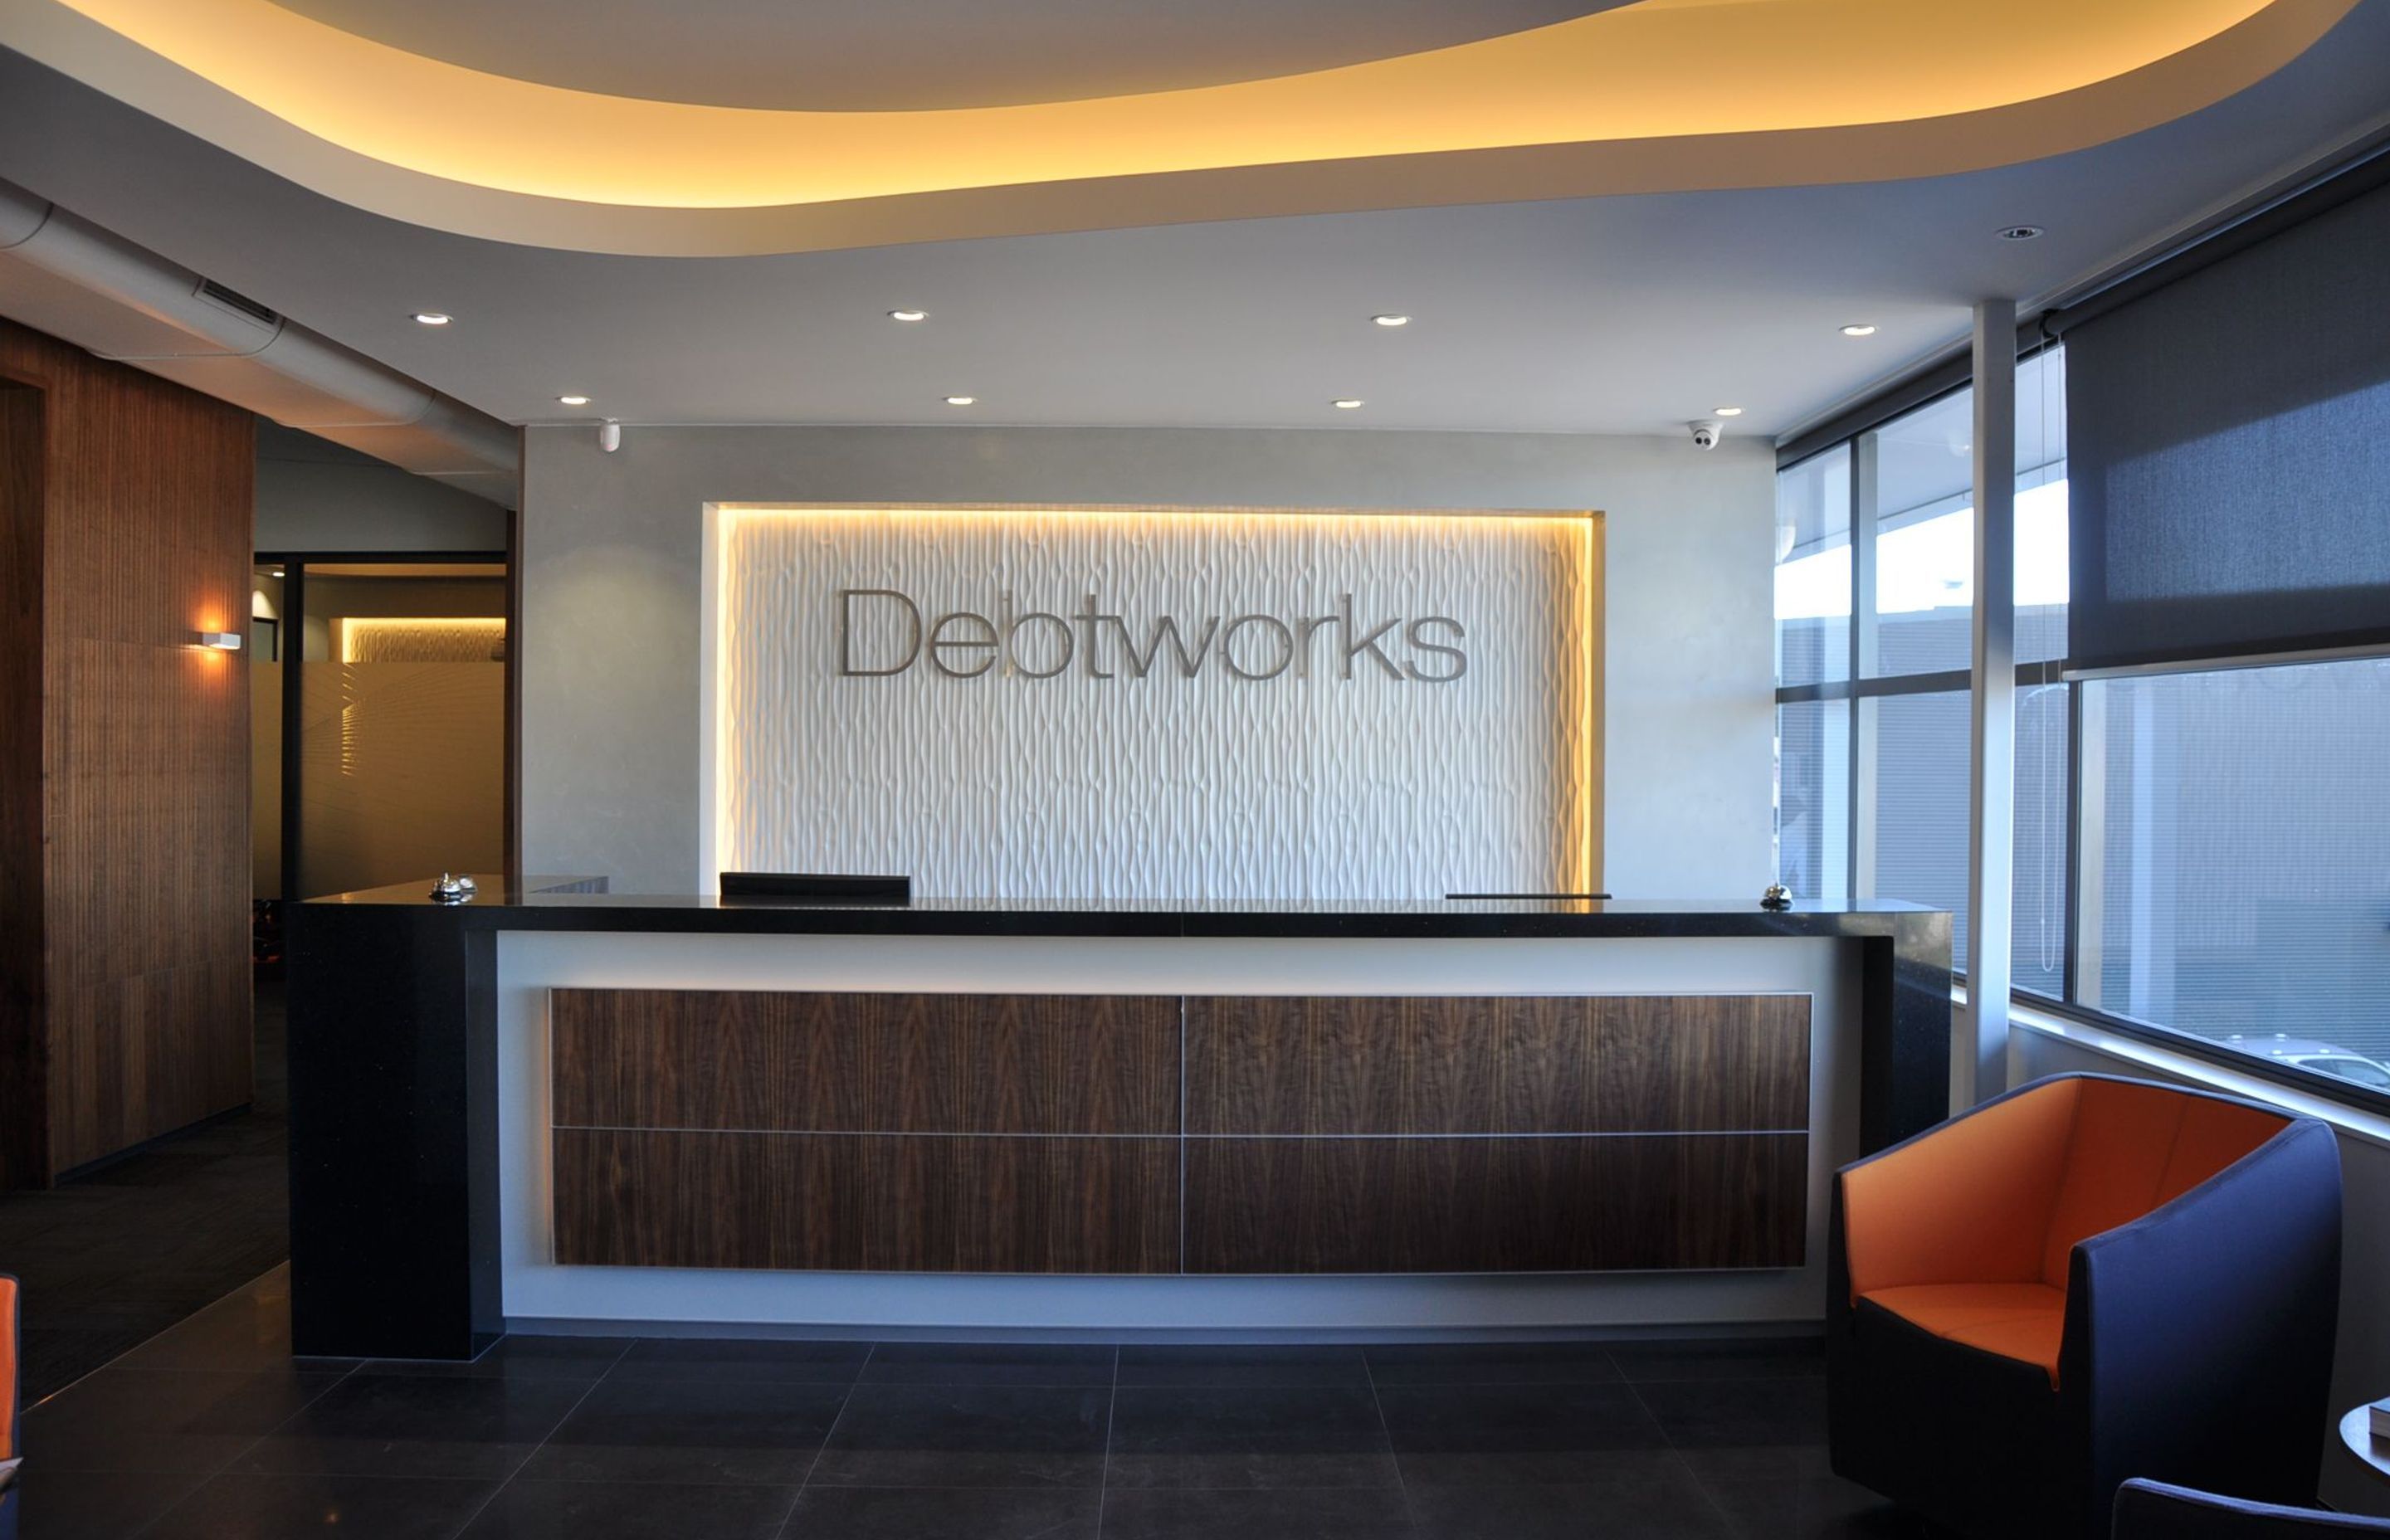 Debtworks Fitout